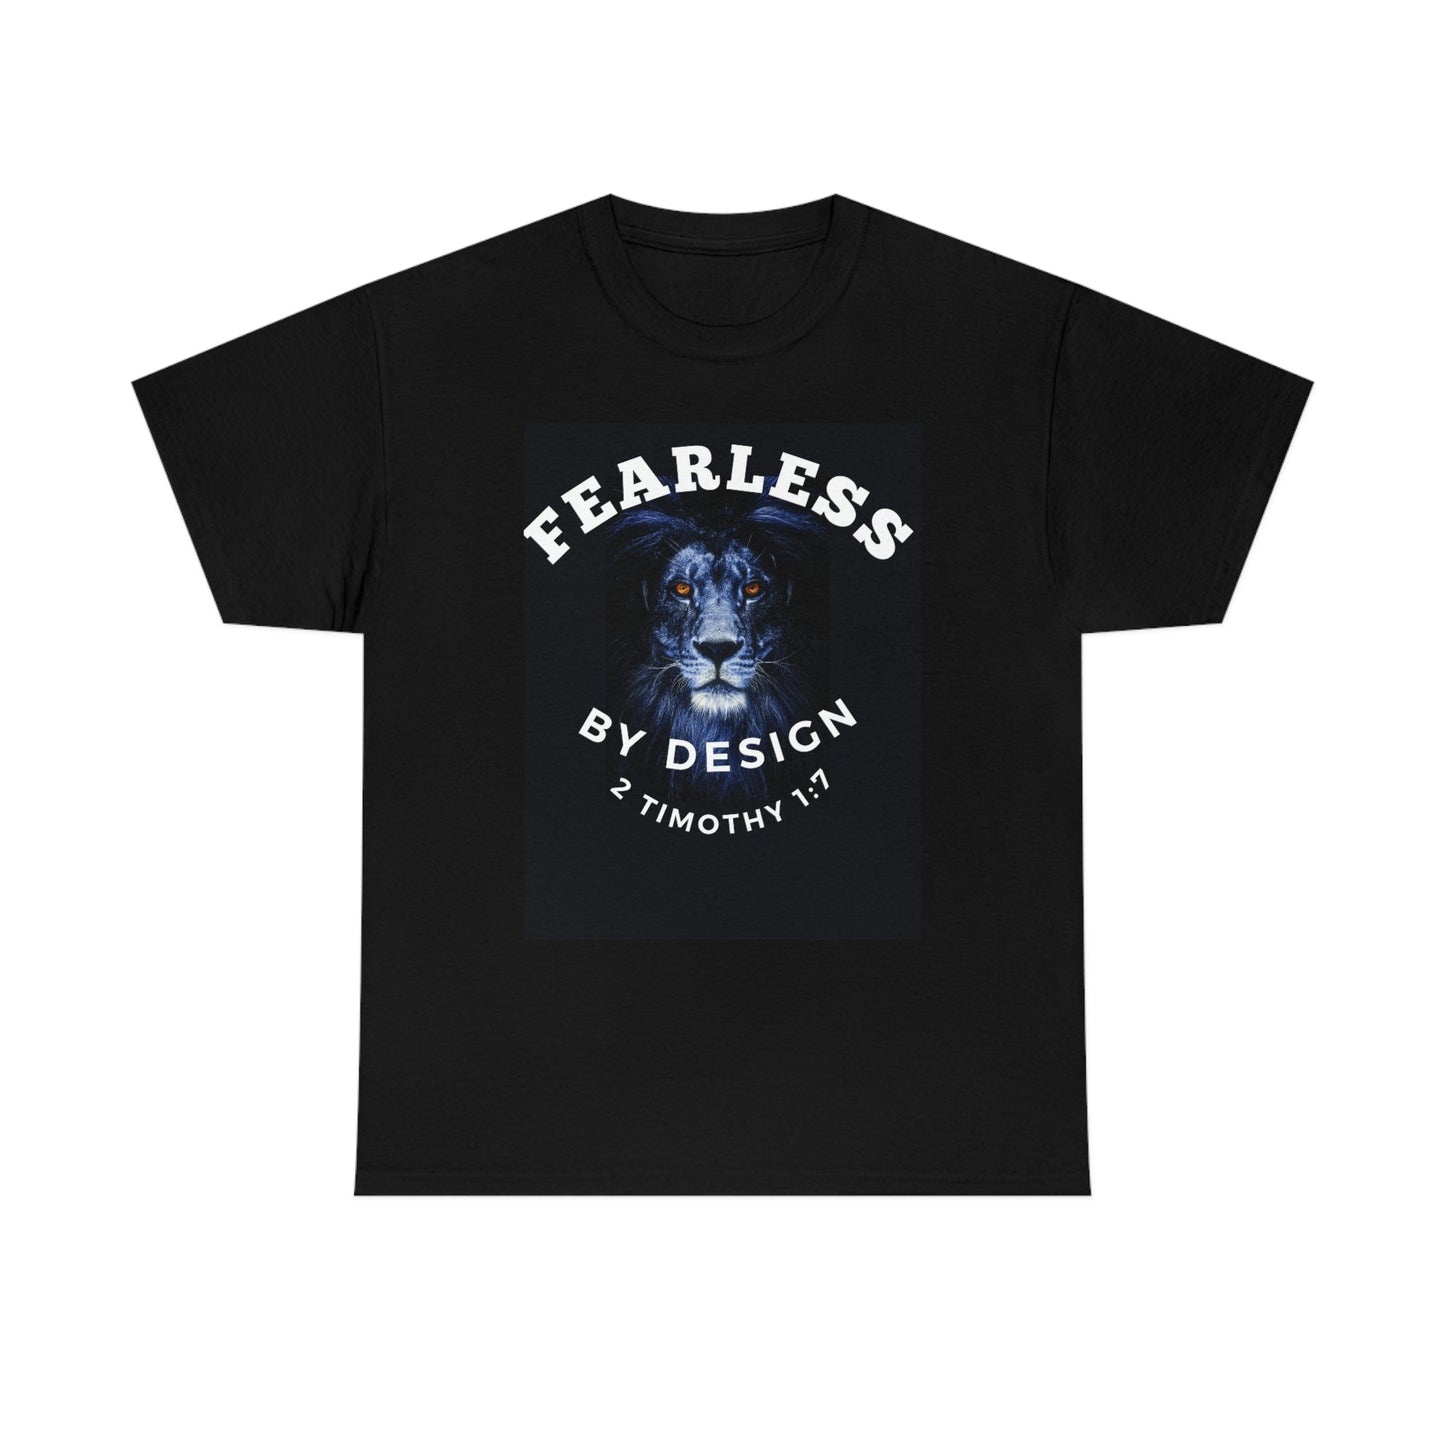 Fearless By Design Unisex Heavy Cotton Tee